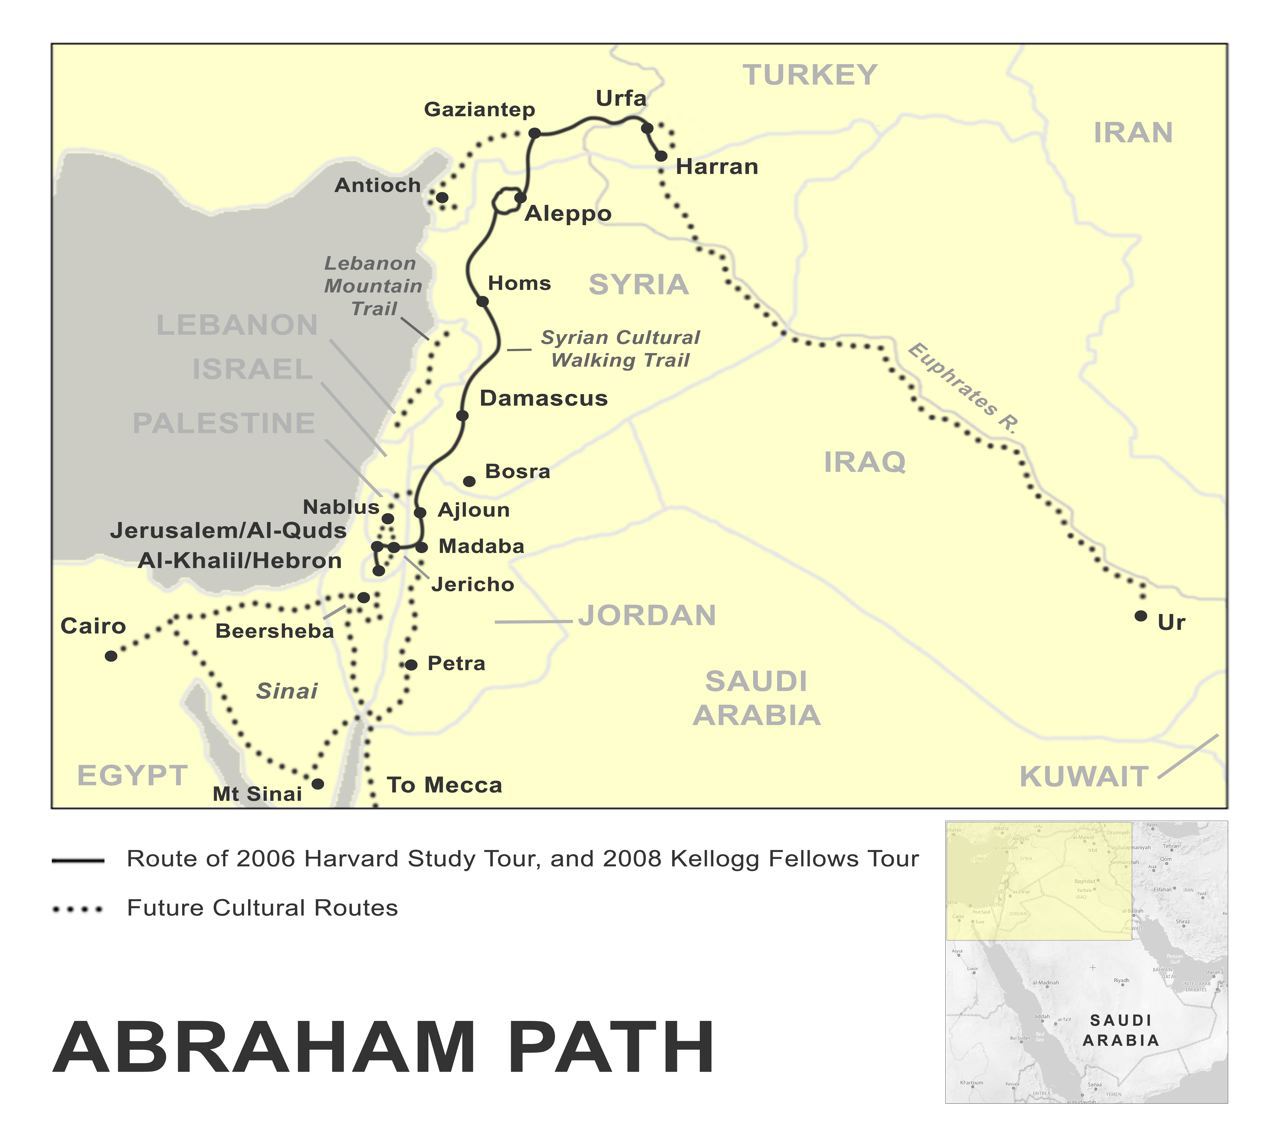 Abraham path re only some of